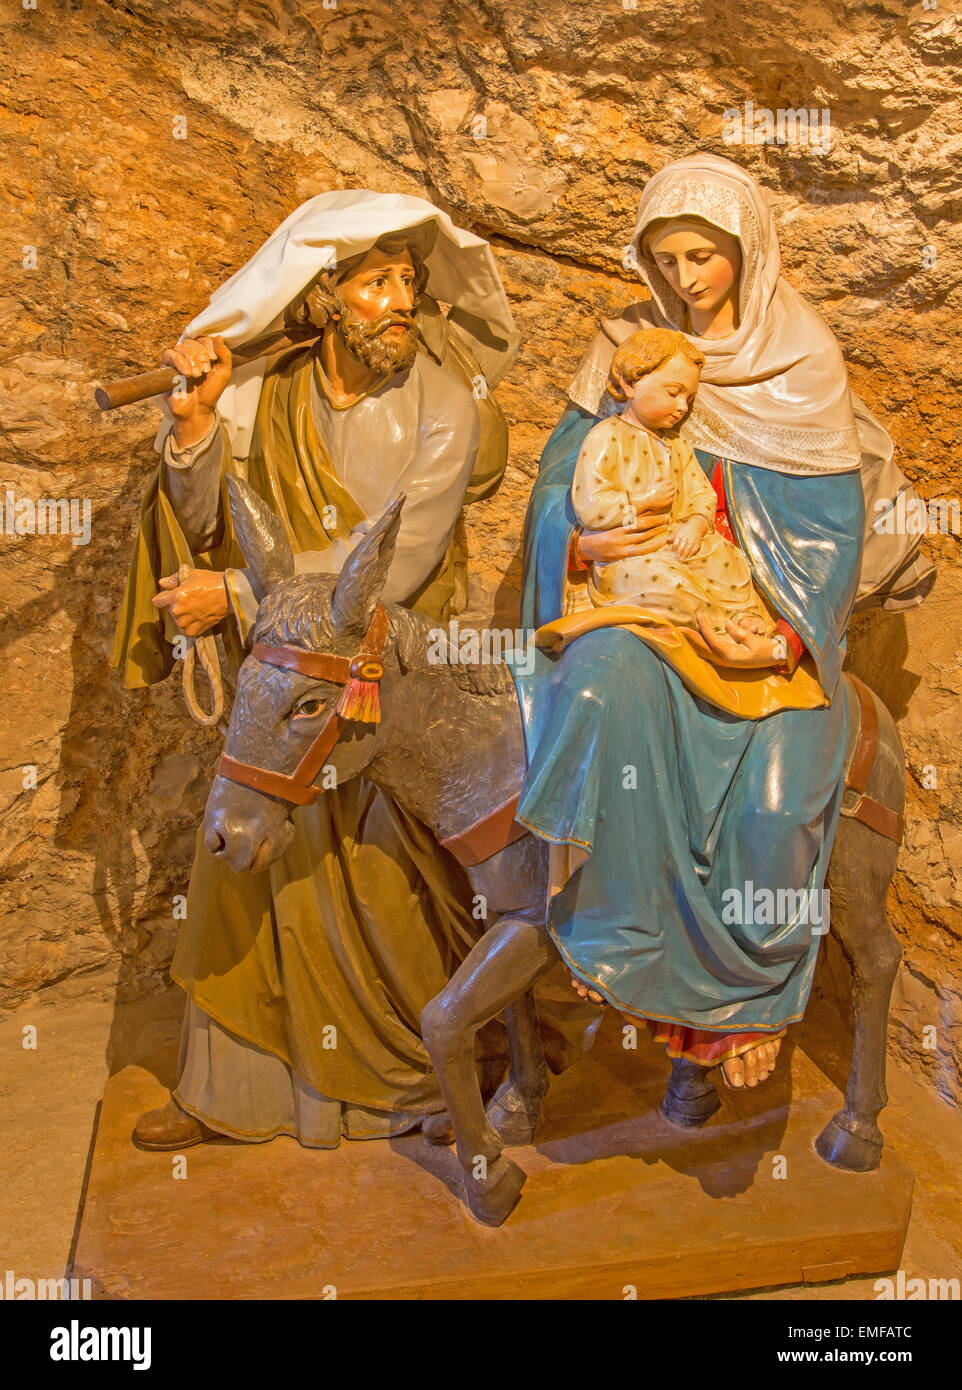 BETHLEHEM, ISRAEL - MARCH 6, 2015: The carved sculpture of Holy Family in 'Milk Grotto'. Stock Photo